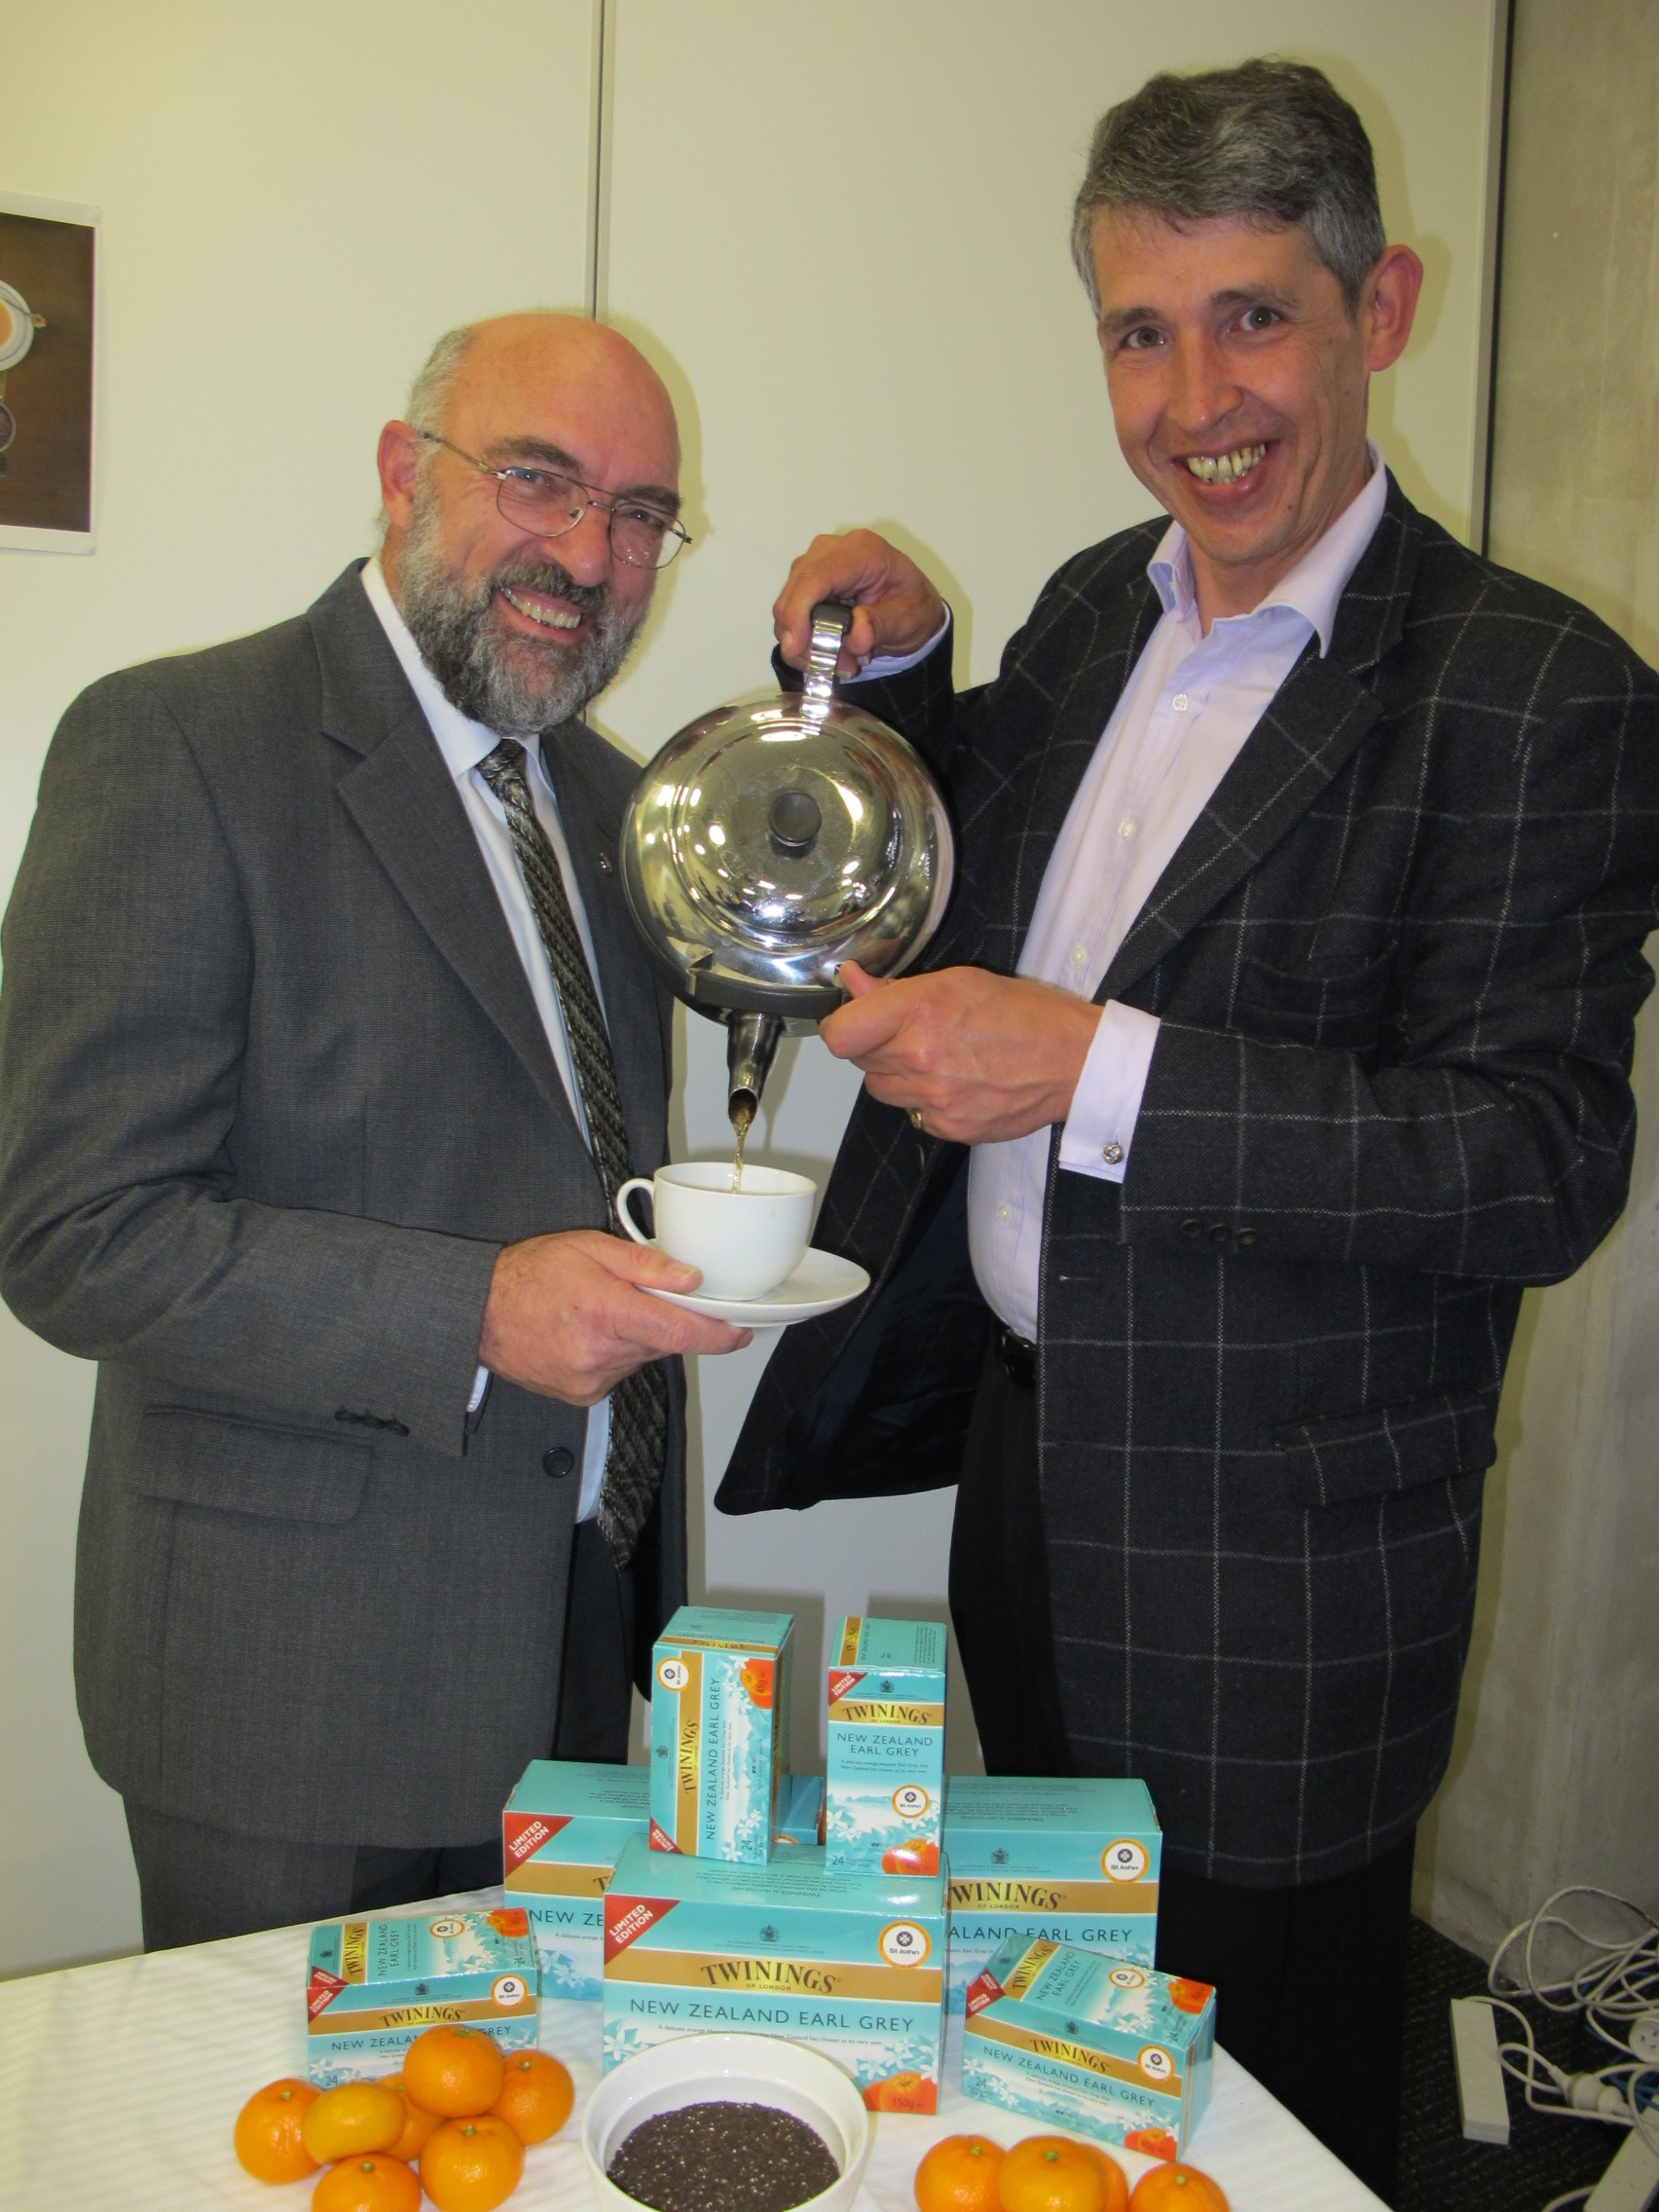 St John Fundraising Manager Jim Datson shares a cup of tea with Stephen Twining of Twinings tea company.